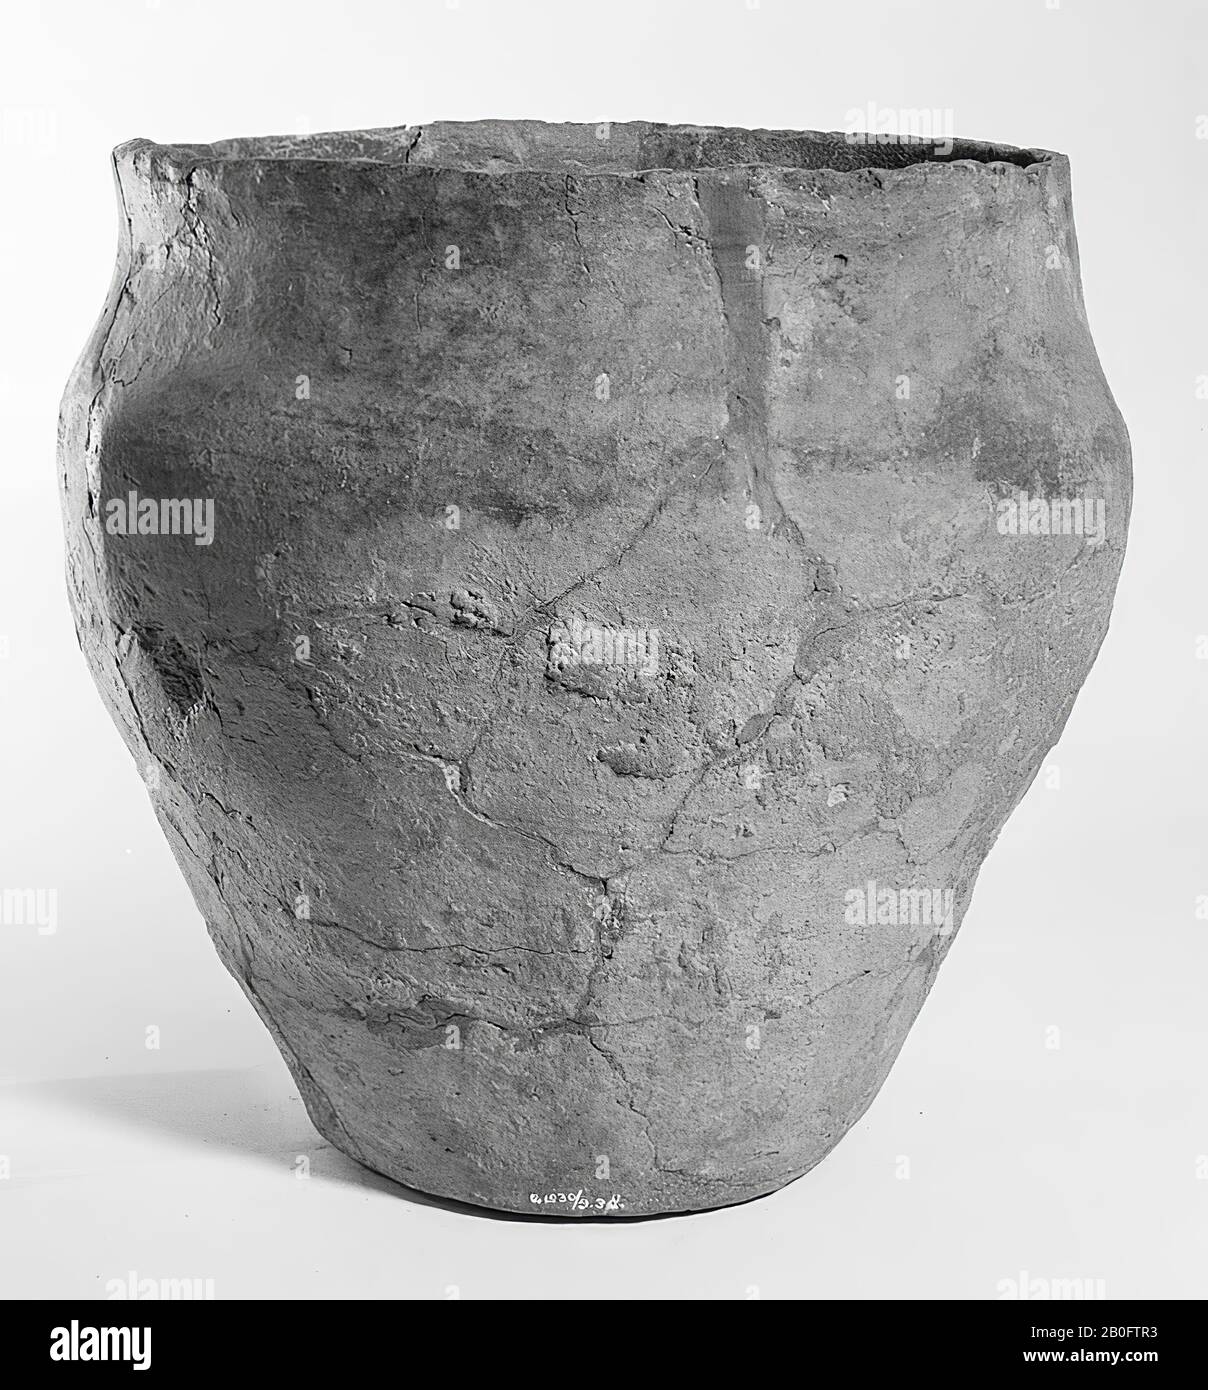 Harpstedterurn of pottery. Open old gluing in the edge, old gluing and additions. Contains cremated residues, urn, earthenware, h: 24 cm, diam: 25 cm, prehistory -800 Stock Photo